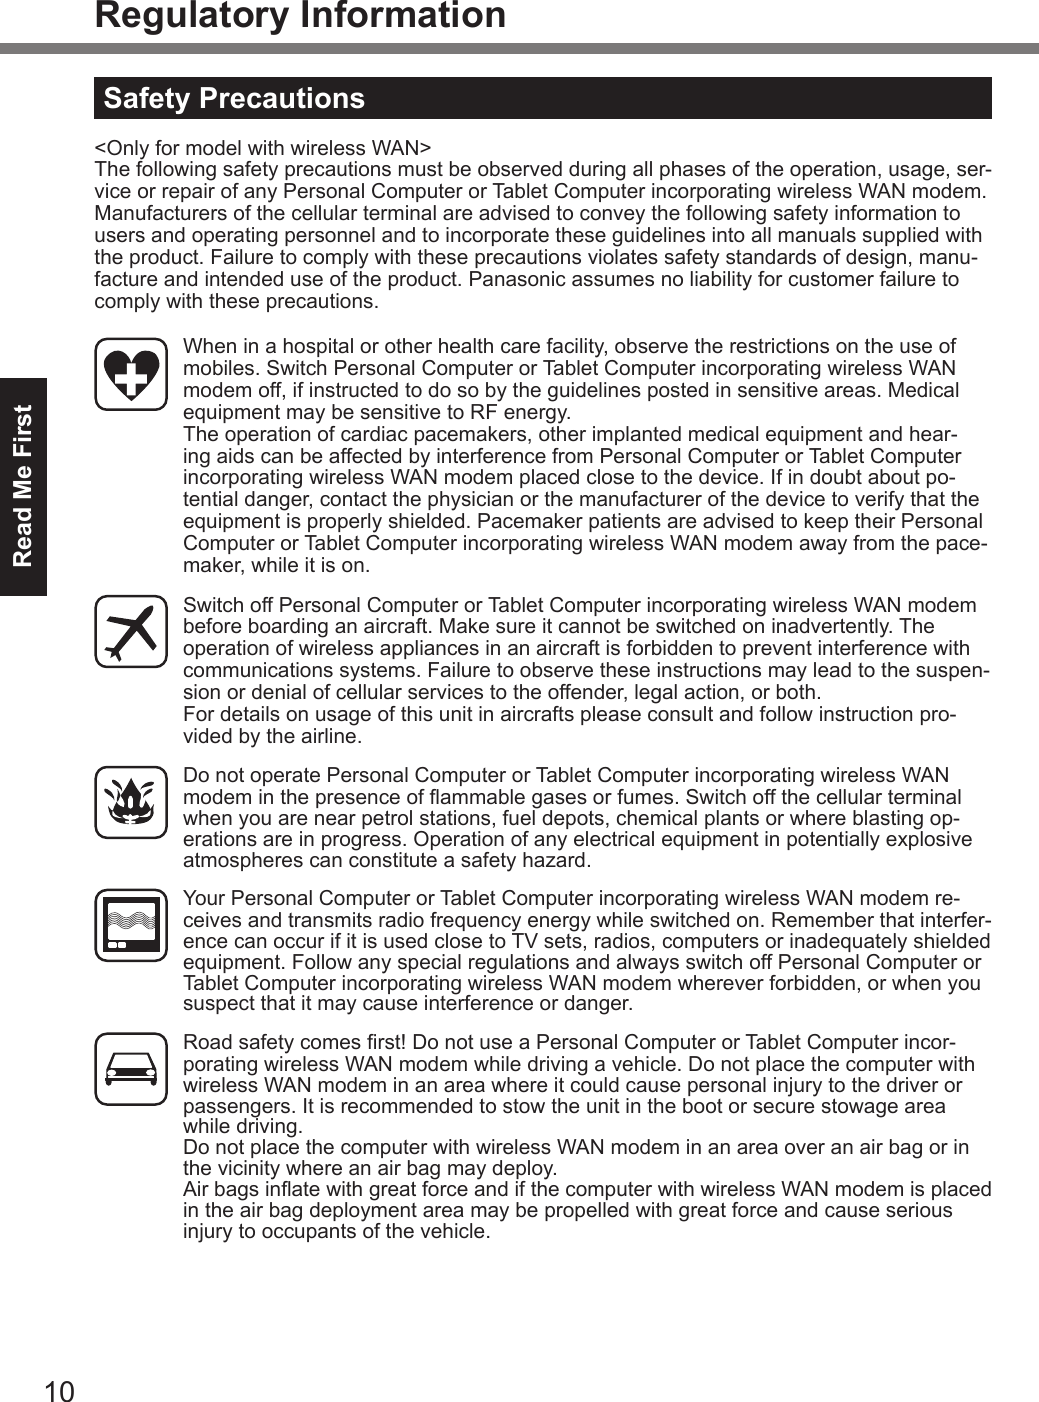 10Read Me FirstRegulatory InformationSafety Precautions&lt;Only for model with wireless WAN&gt;The following safety precautions must be observed during all phases of the operation, usage, ser-vice or repair of any Personal Computer or Tablet Computer incorporating wireless WAN modem. Manufacturers of the cellular terminal are advised to convey the following safety information to users and operating personnel and to incorporate these guidelines into all manuals supplied with the product. Failure to comply with these precautions violates safety standards of design, manu-facture and intended use of the product. Panasonic assumes no liability for customer failure to comply with these precautions.  When in a hospital or other health care facility, observe the restrictions on the use of mobiles. Switch Personal Computer or Tablet Computer incorporating wireless WAN modem off, if instructed to do so by the guidelines posted in sensitive areas. Medical equipment may be sensitive to RF energy.   The operation of cardiac pacemakers, other implanted medical equipment and hear-ing aids can be affected by interference from Personal Computer or Tablet Computer incorporating wireless WAN modem placed close to the device. If in doubt about po-tential danger, contact the physician or the manufacturer of the device to verify that the equipment is properly shielded. Pacemaker patients are advised to keep their Personal Computer or Tablet Computer incorporating wireless WAN modem away from the pace-maker, while it is on.  Switch off Personal Computer or Tablet Computer incorporating wireless WAN modem before boarding an aircraft. Make sure it cannot be switched on inadvertently. The operation of wireless appliances in an aircraft is forbidden to prevent interference with communications systems. Failure to observe these instructions may lead to the suspen-sion or denial of cellular services to the offender, legal action, or both. For details on usage of this unit in aircrafts please consult and follow instruction pro-vided by the airline.  Do not operate Personal Computer or Tablet Computer incorporating wireless WAN modem in the presence of ammable gases or fumes. Switch off the cellular terminal when you are near petrol stations, fuel depots, chemical plants or where blasting op-erations are in progress. Operation of any electrical equipment in potentially explosive atmospheres can constitute a safety hazard.  Your Personal Computer or Tablet Computer incorporating wireless WAN modem re-ceives and transmits radio frequency energy while switched on. Remember that interfer-ence can occur if it is used close to TV sets, radios, computers or inadequately shielded equipment. Follow any special regulations and always switch off Personal Computer or Tablet Computer incorporating wireless WAN modem wherever forbidden, or when you suspect that it may cause interference or danger. Road safety comes rst! Do not use a Personal Computer or Tablet Computer incor-porating wireless WAN modem while driving a vehicle. Do not place the computer with wireless WAN modem in an area where it could cause personal injury to the driver or passengers. It is recommended to stow the unit in the boot or secure stowage area while driving.   Do not place the computer with wireless WAN modem in an area over an air bag or in the vicinity where an air bag may deploy.   Air bags inate with great force and if the computer with wireless WAN modem is placed in the air bag deployment area may be propelled with great force and cause serious injury to occupants of the vehicle.